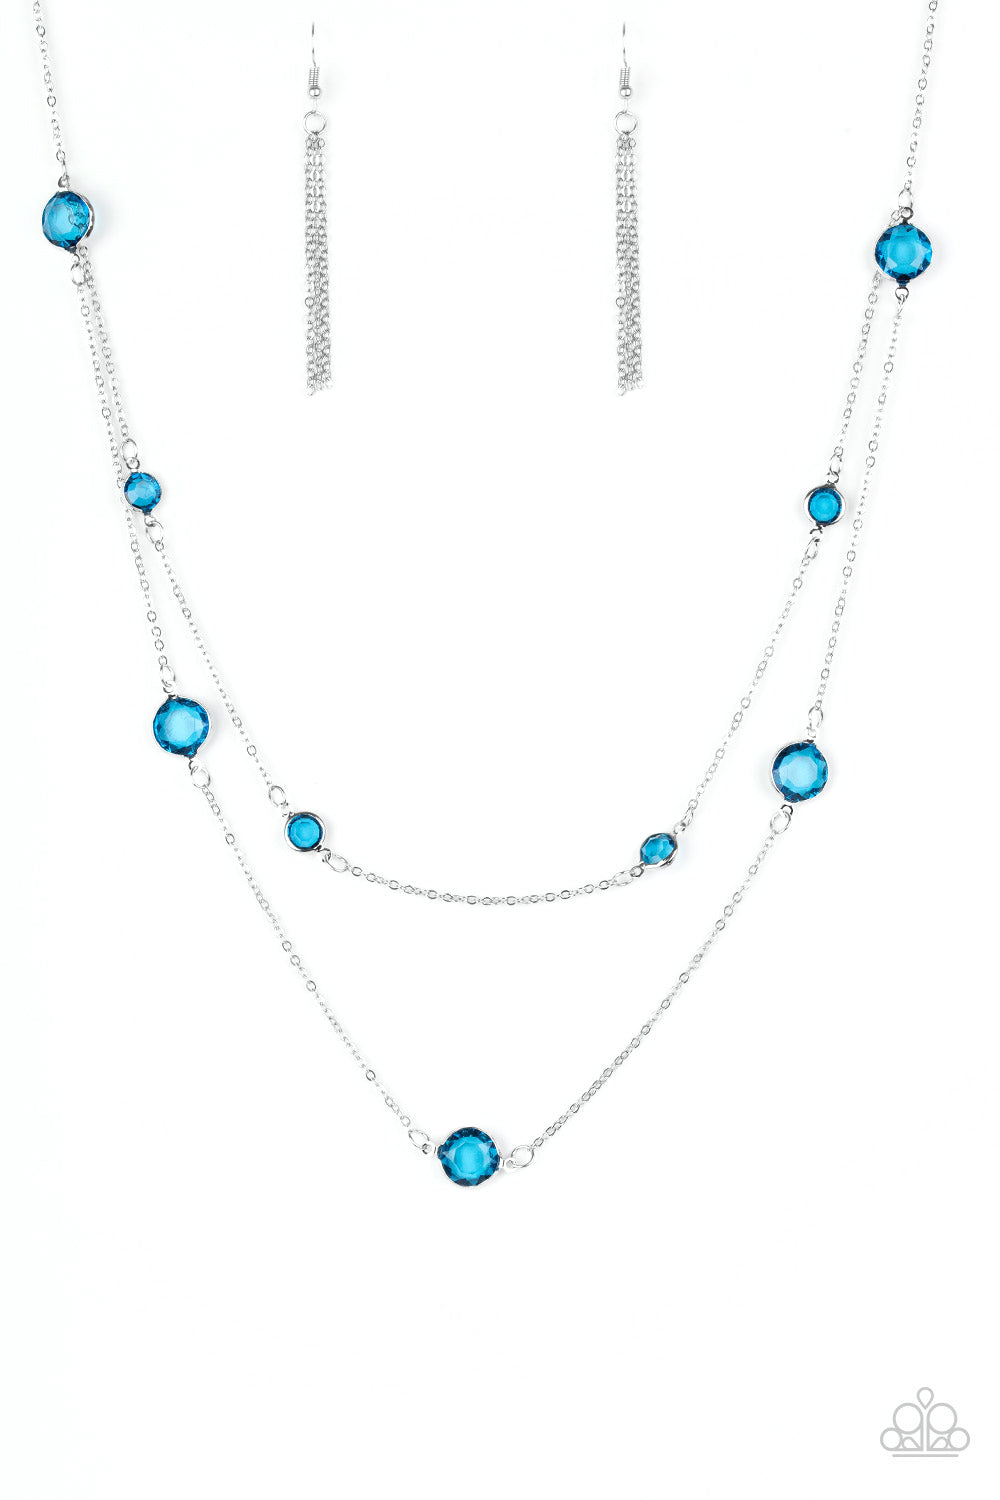 Raise Your Glass - Blue Glassy Gems/Silver Dainty Chain Paparazzi Necklace & matching earrings